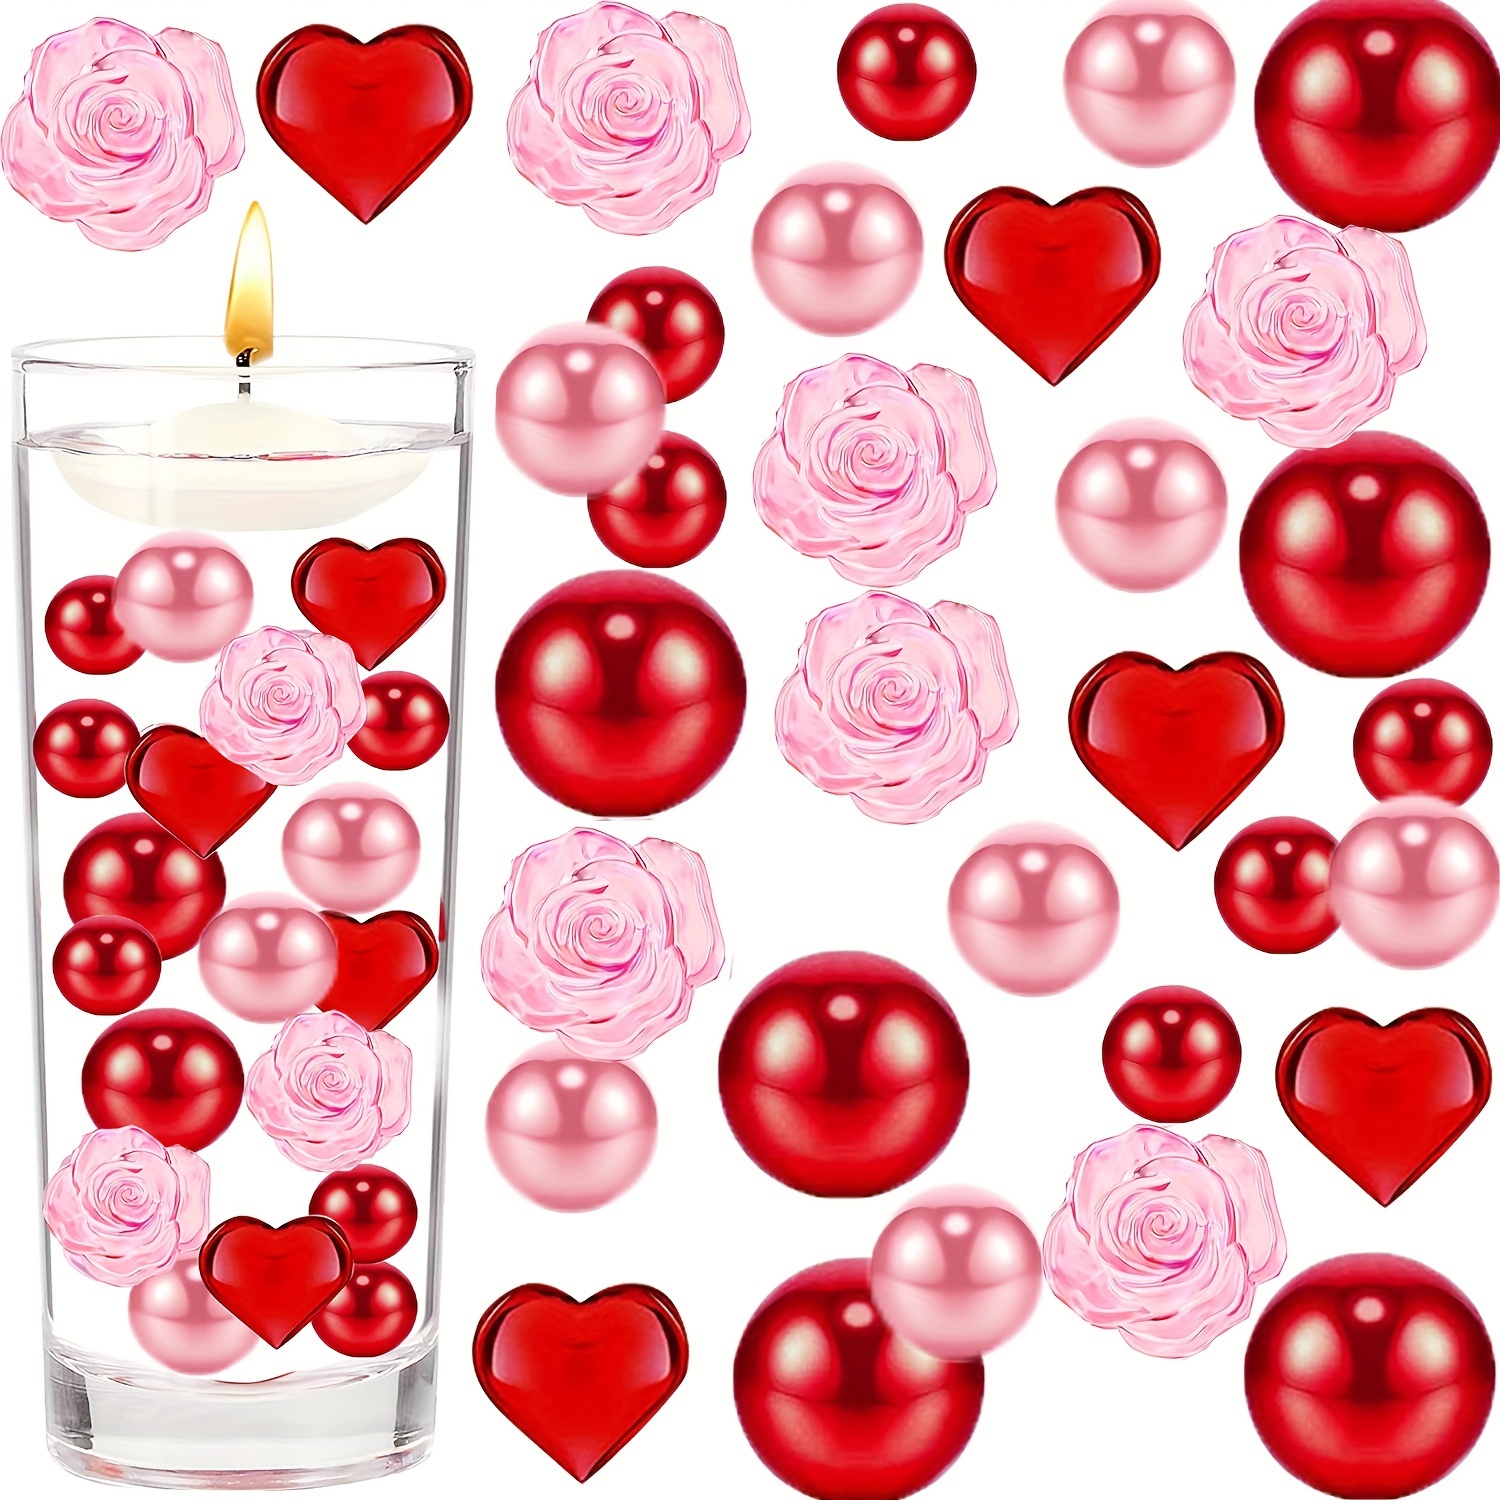 110pcs Valentine's Day Vase Fillers, Heart Lip Rose Artificial Pearl  Floating Candle Centerpieces For Wedding Party Valentine's Day Table Home  Festiva